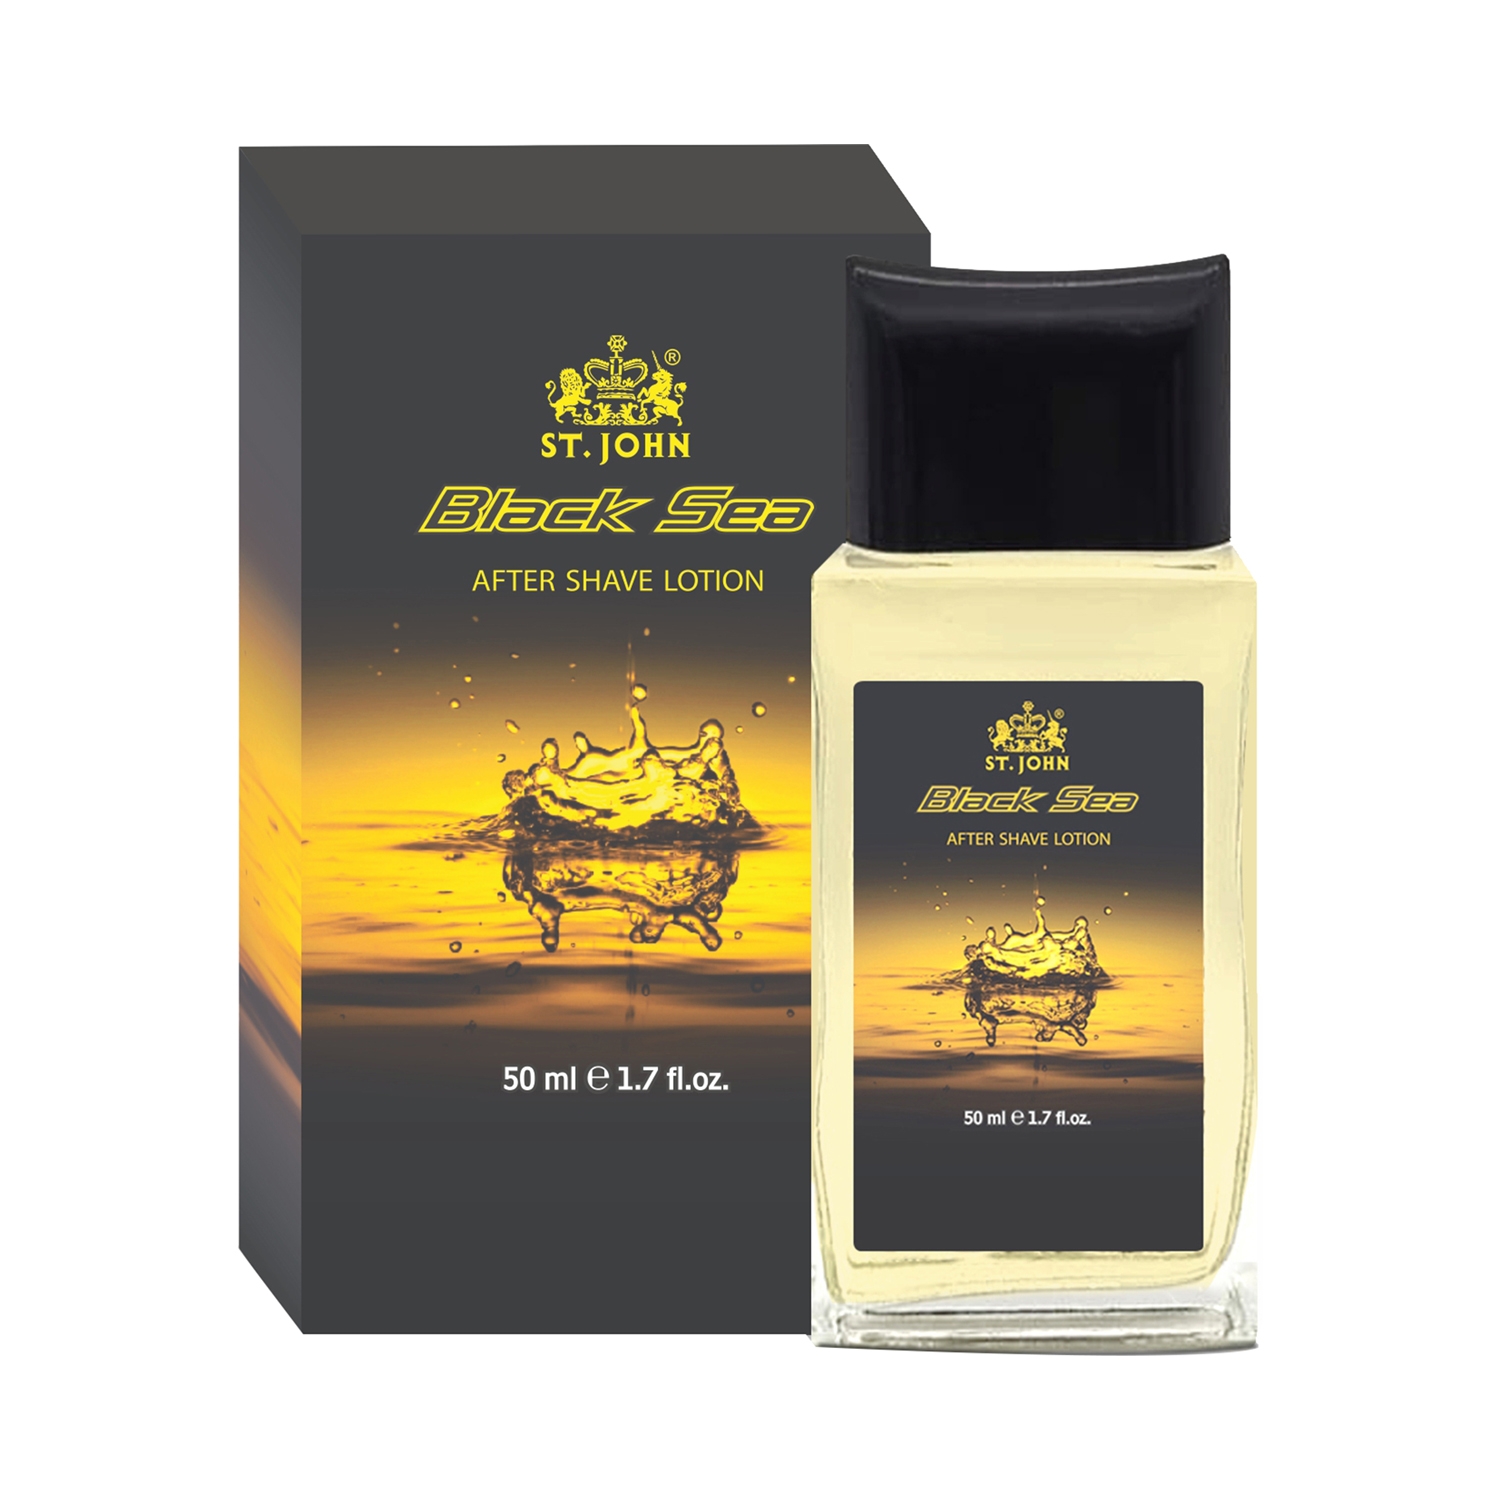 ST.JOHN Black Sea After Shave Lotion (50ml)